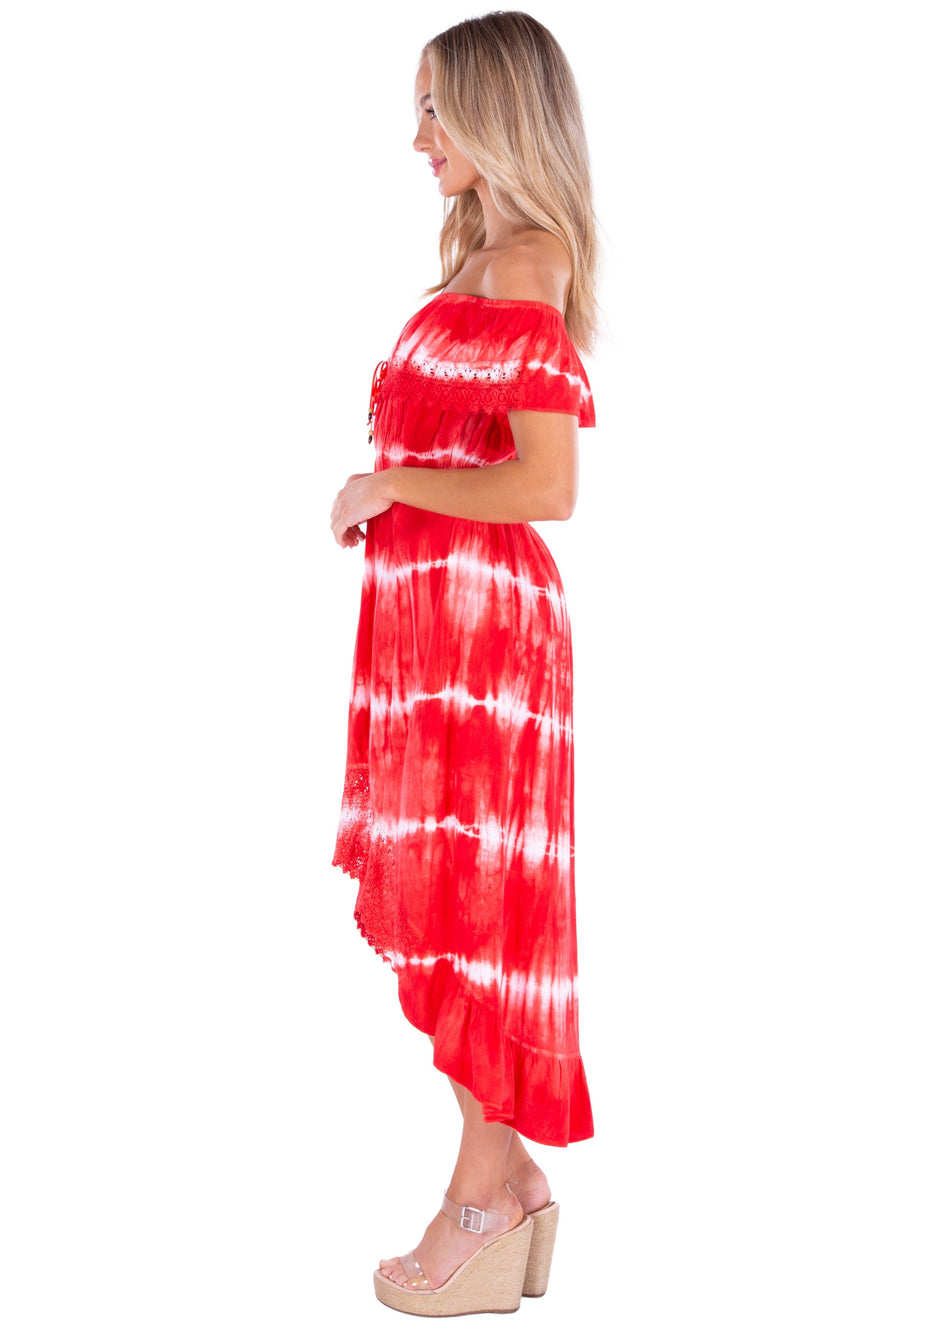 NW1083 - Tie Dye Red Cotton Dress